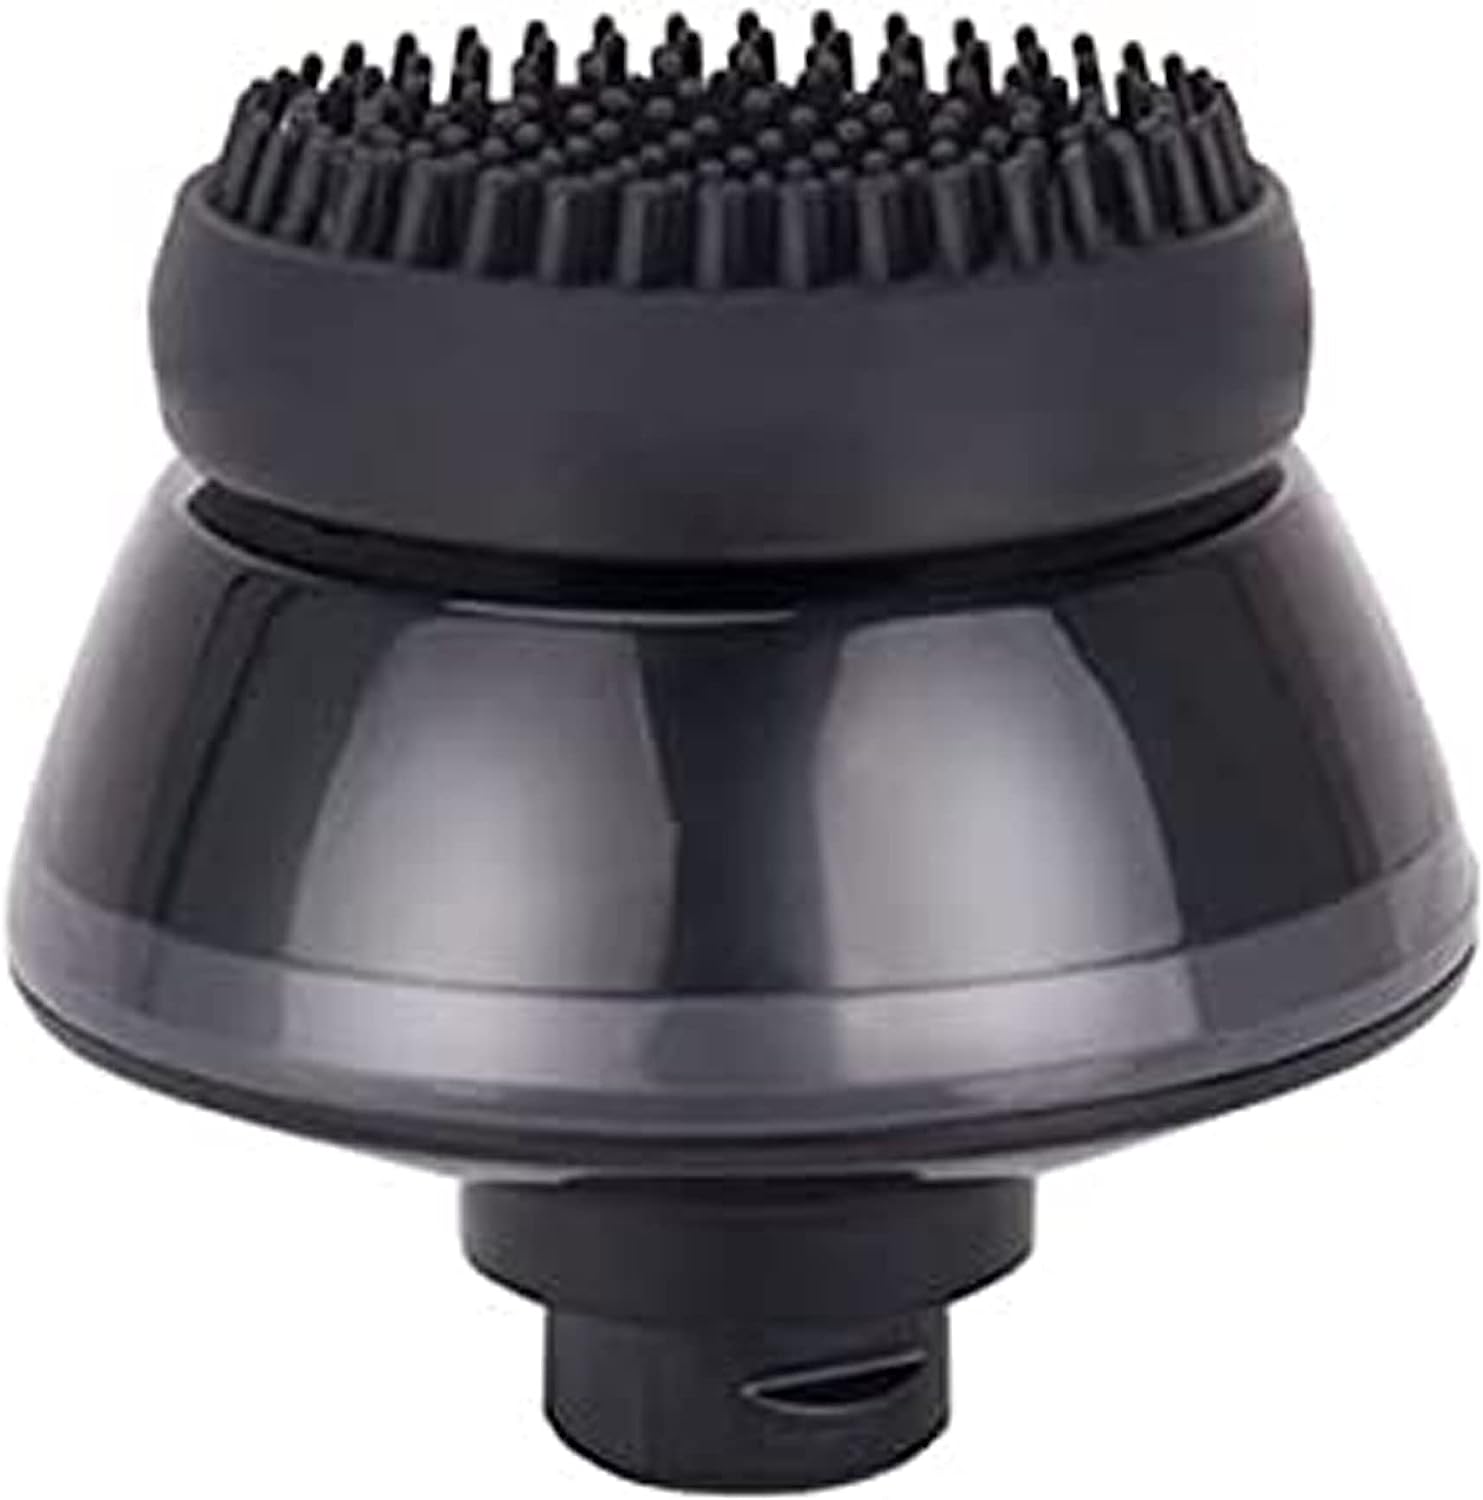 AW Facial Massage Brush Head for AW 5-in-1 Electric Head Shaver, 𝐈𝐭 𝐢𝐬 𝐧𝐨𝐭 𝐟𝐨𝐫 𝐌𝐨𝐝𝐞𝐥: 𝐀𝐖-𝐏𝐑𝐎𝟎𝟎𝟏